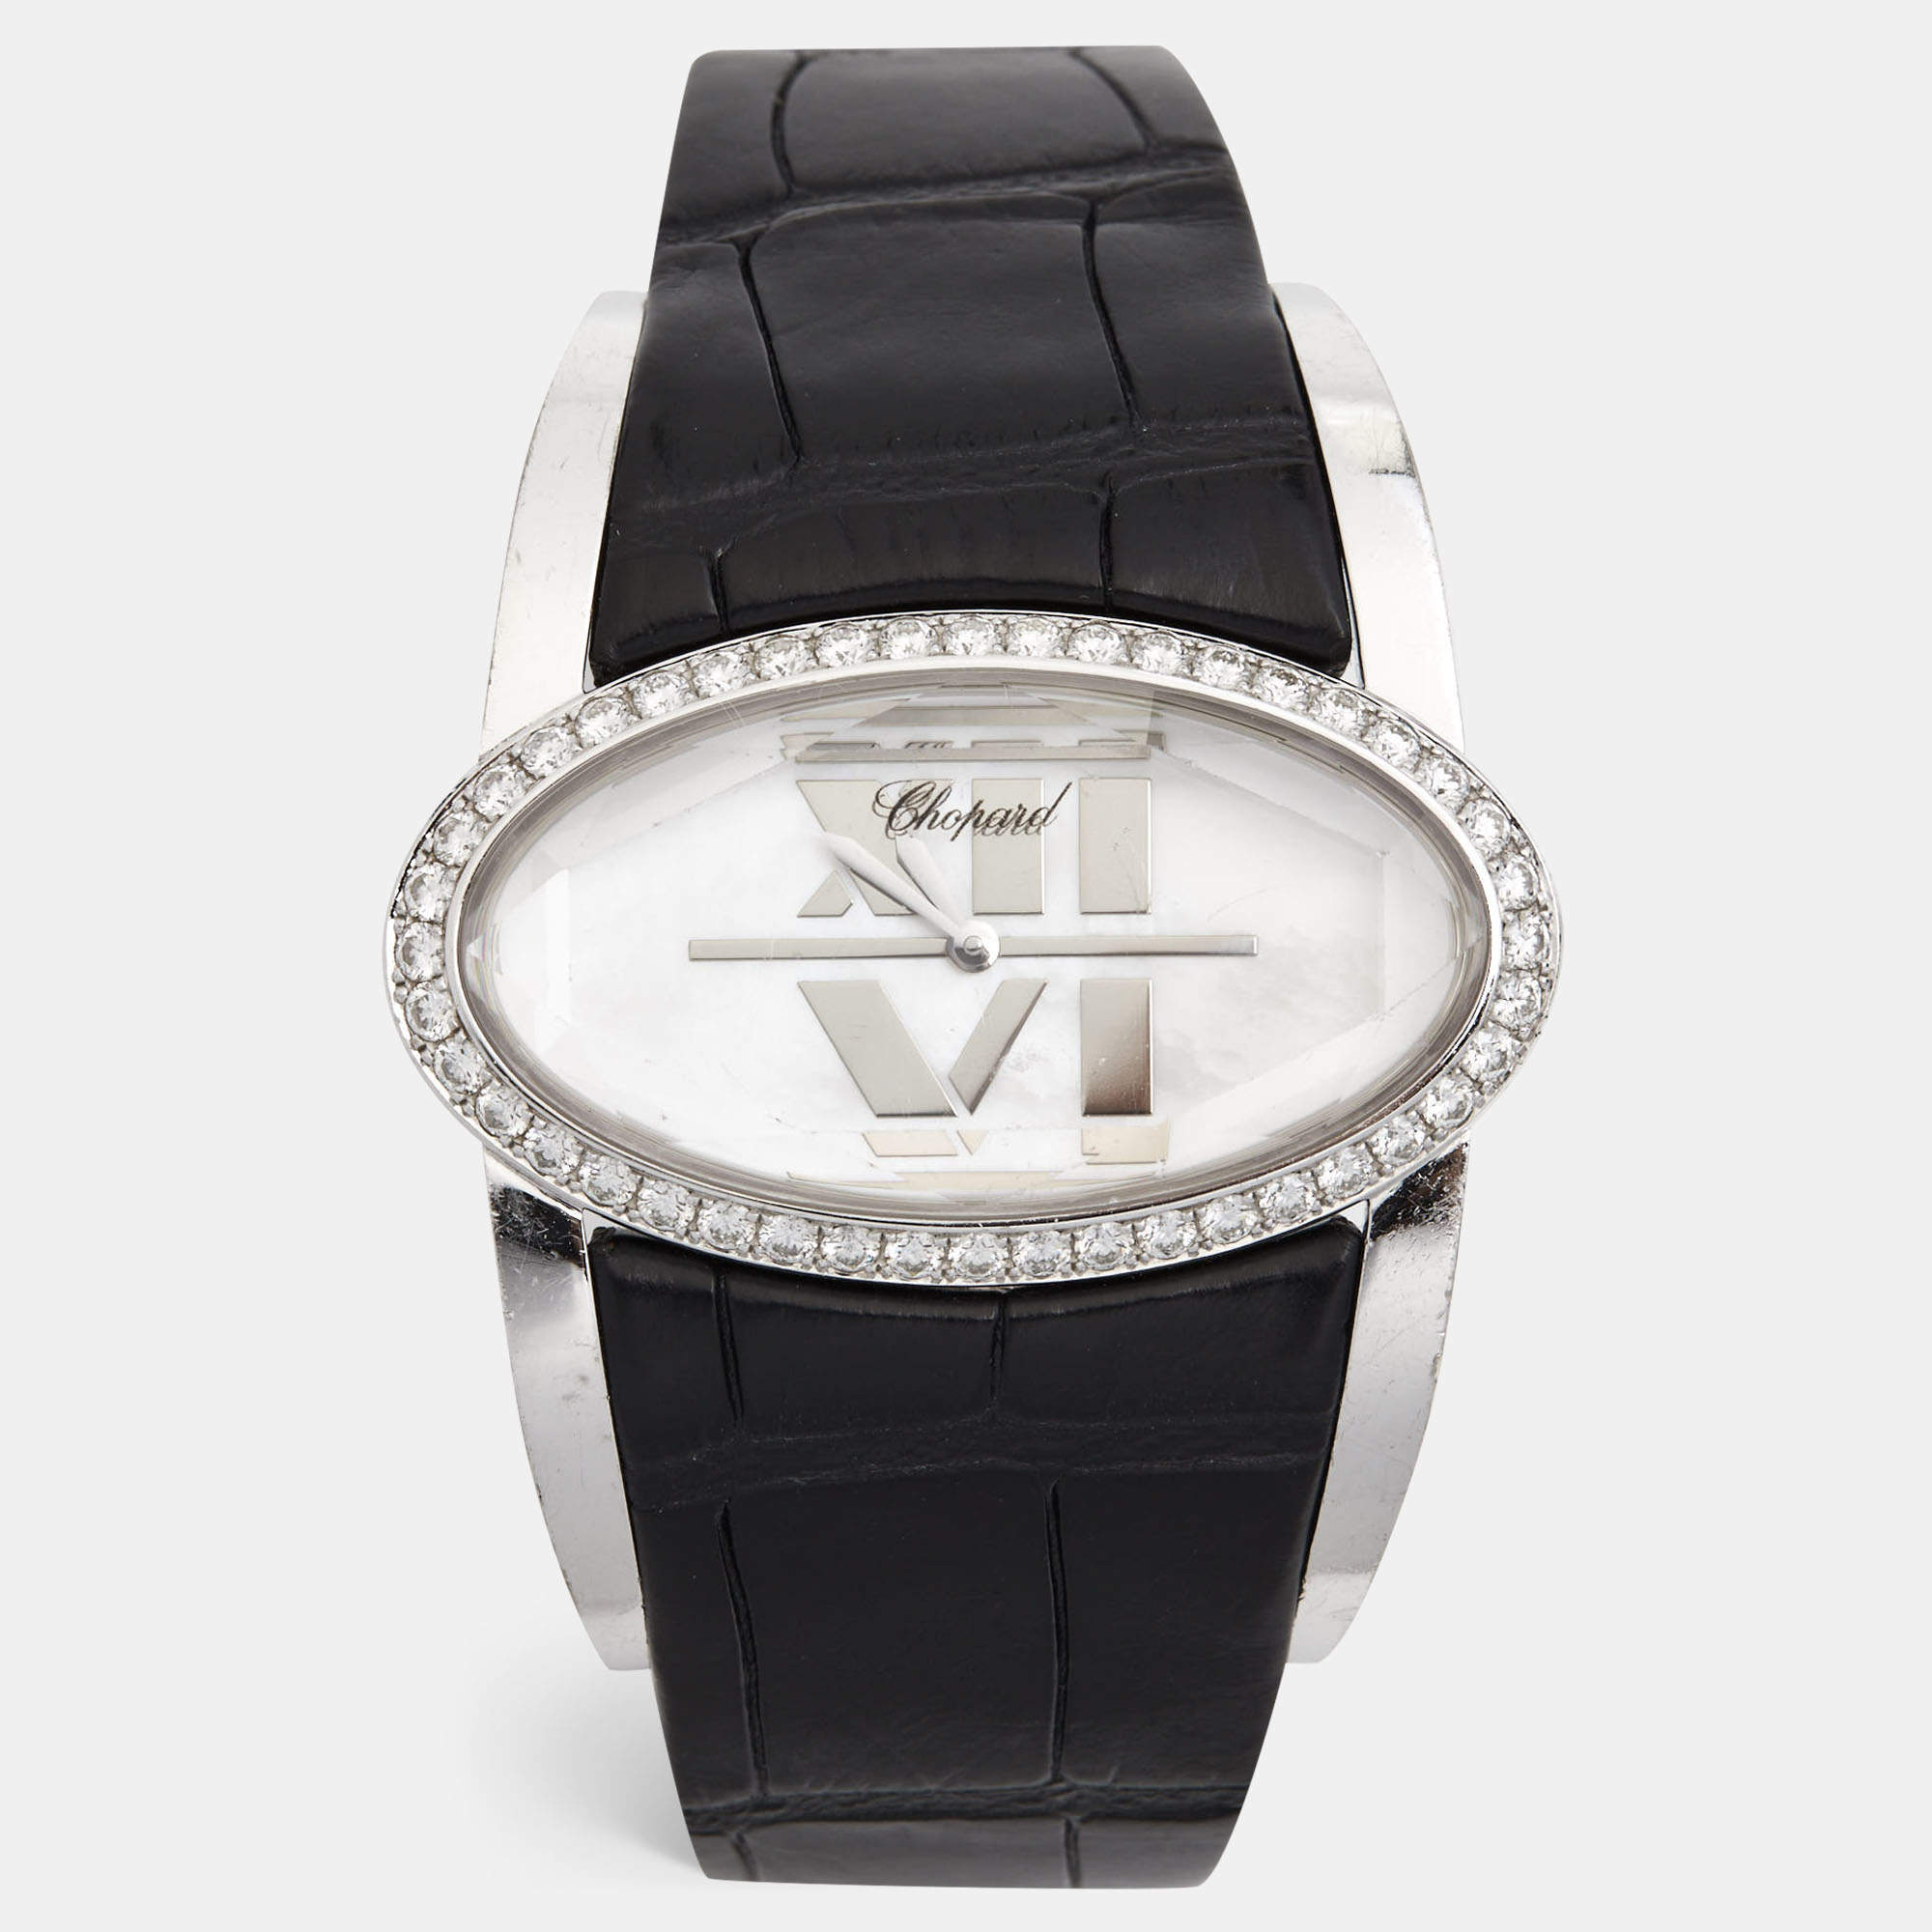 Chopard Mother of Pearl 18k White Gold Alligator Leather Diamond Happy Oval 139018 Women's Wristwatch 42 mm